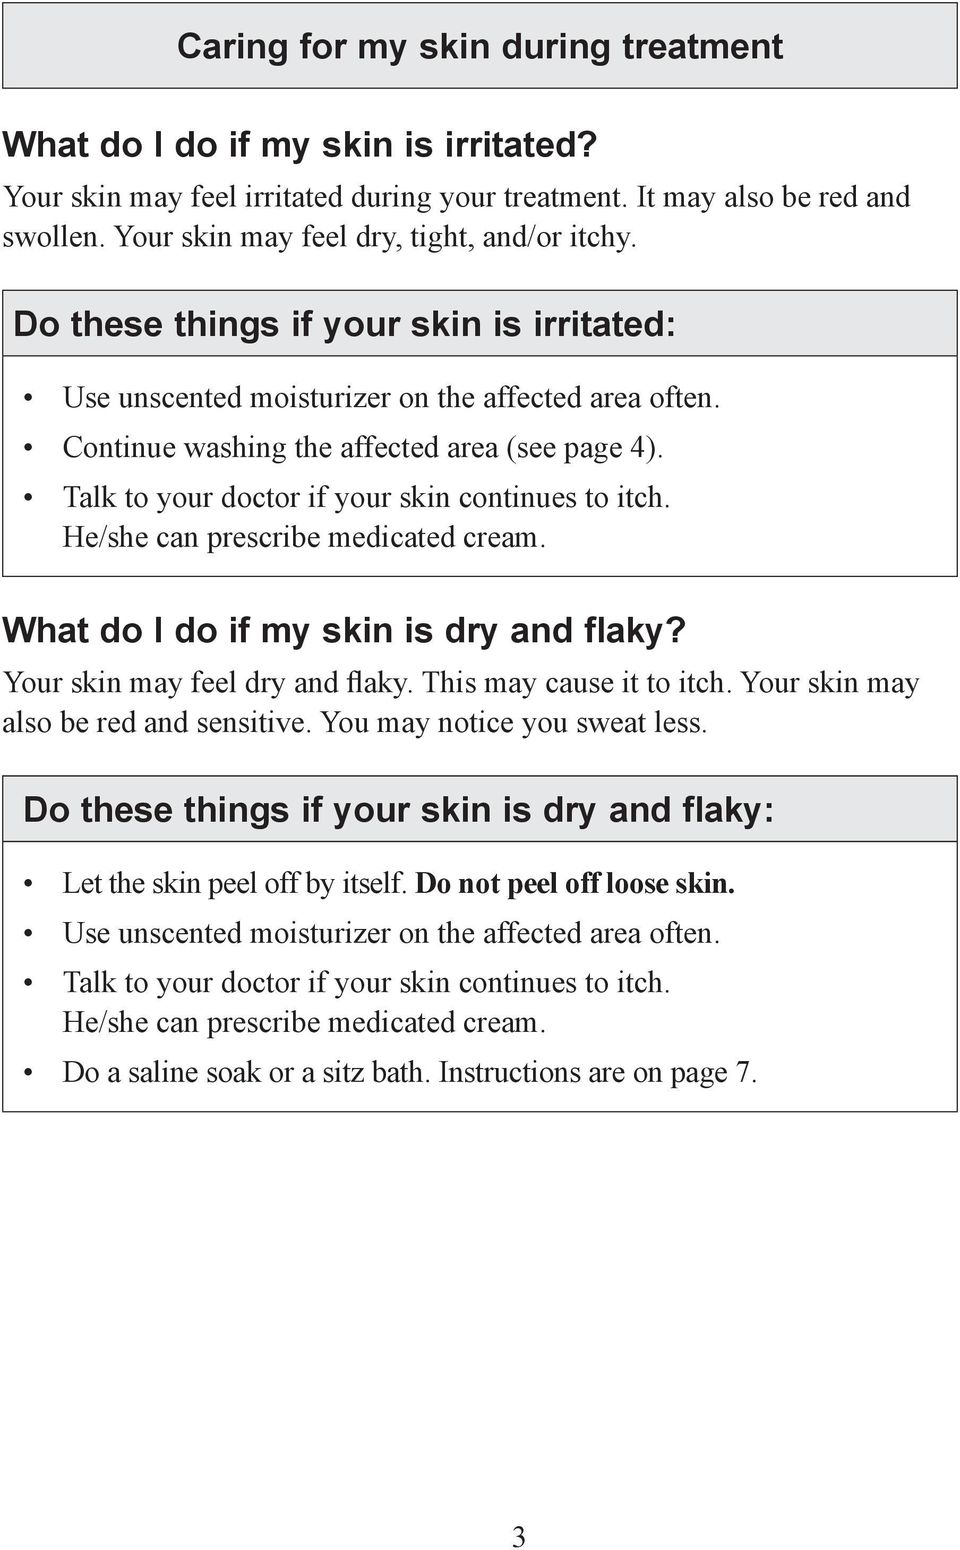 Talk to your doctor if your skin continues to itch. He/she can prescribe medicated cream. What do I do if my skin is dry and flaky? Your skin may feel dry and flaky. This may cause it to itch.